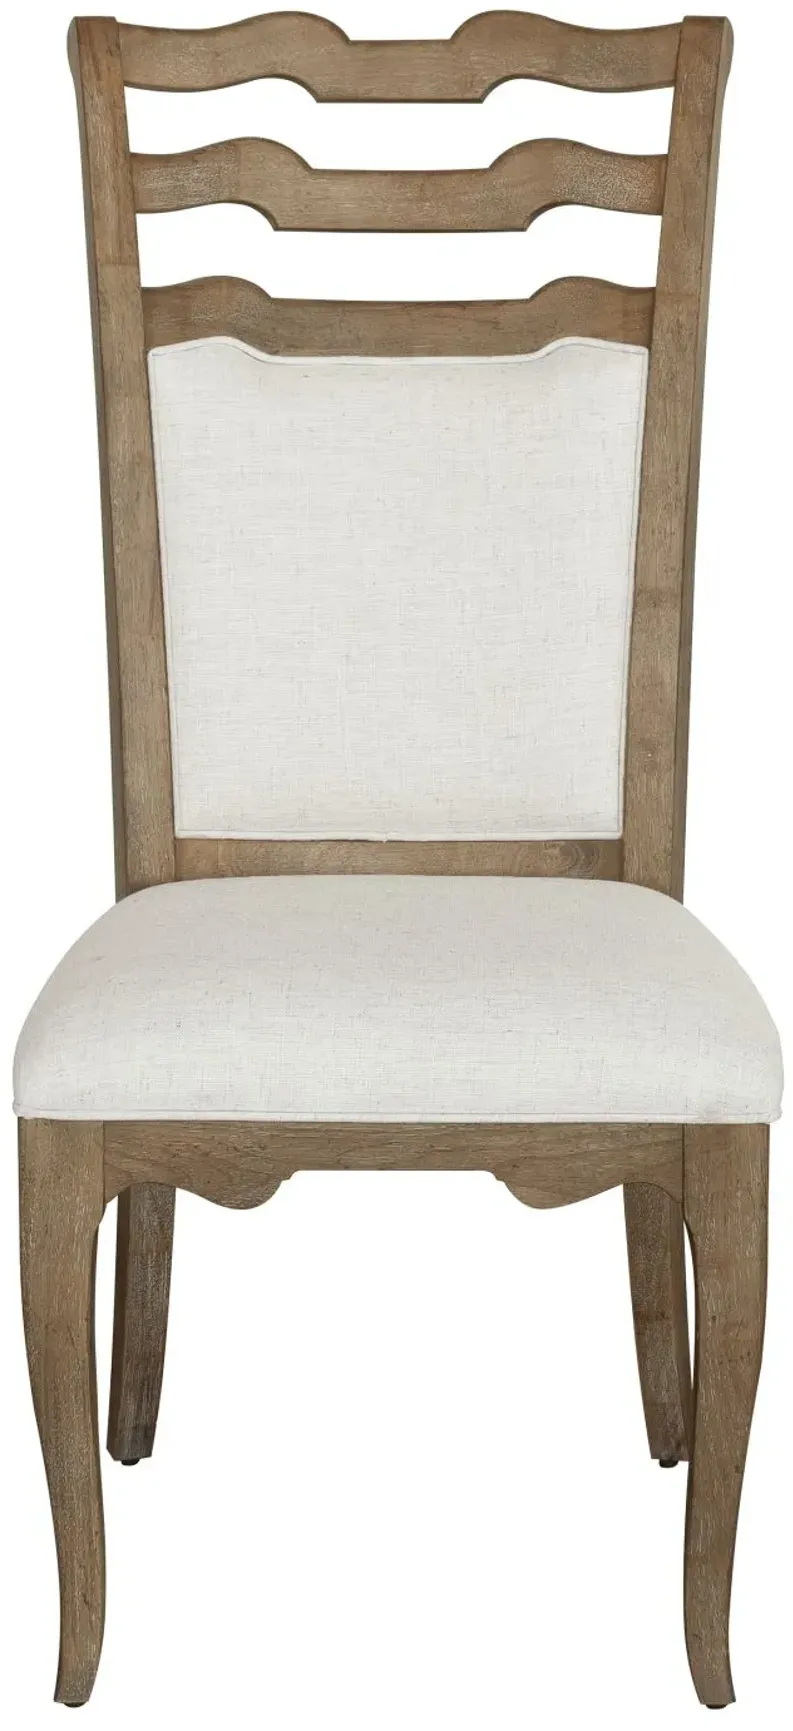 Weston Hills Upholstered Side Chair 2 Pack